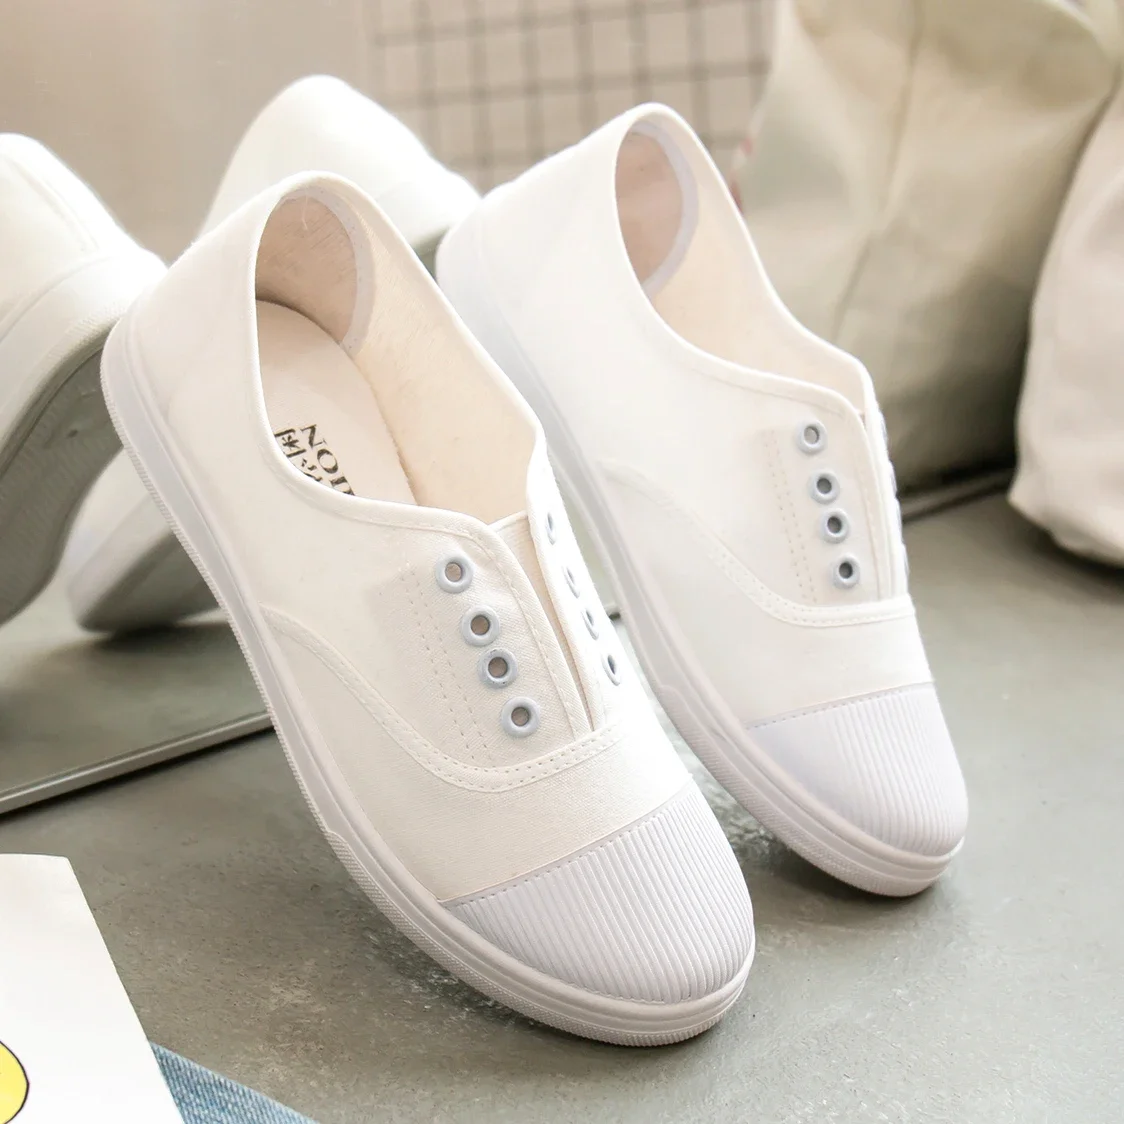 Harajuku Simple New Canvas Shoes White Shoes Female Versatile Student Online Red Single Shoes Street Shot Ulzzang Korean Style Skate Shoes